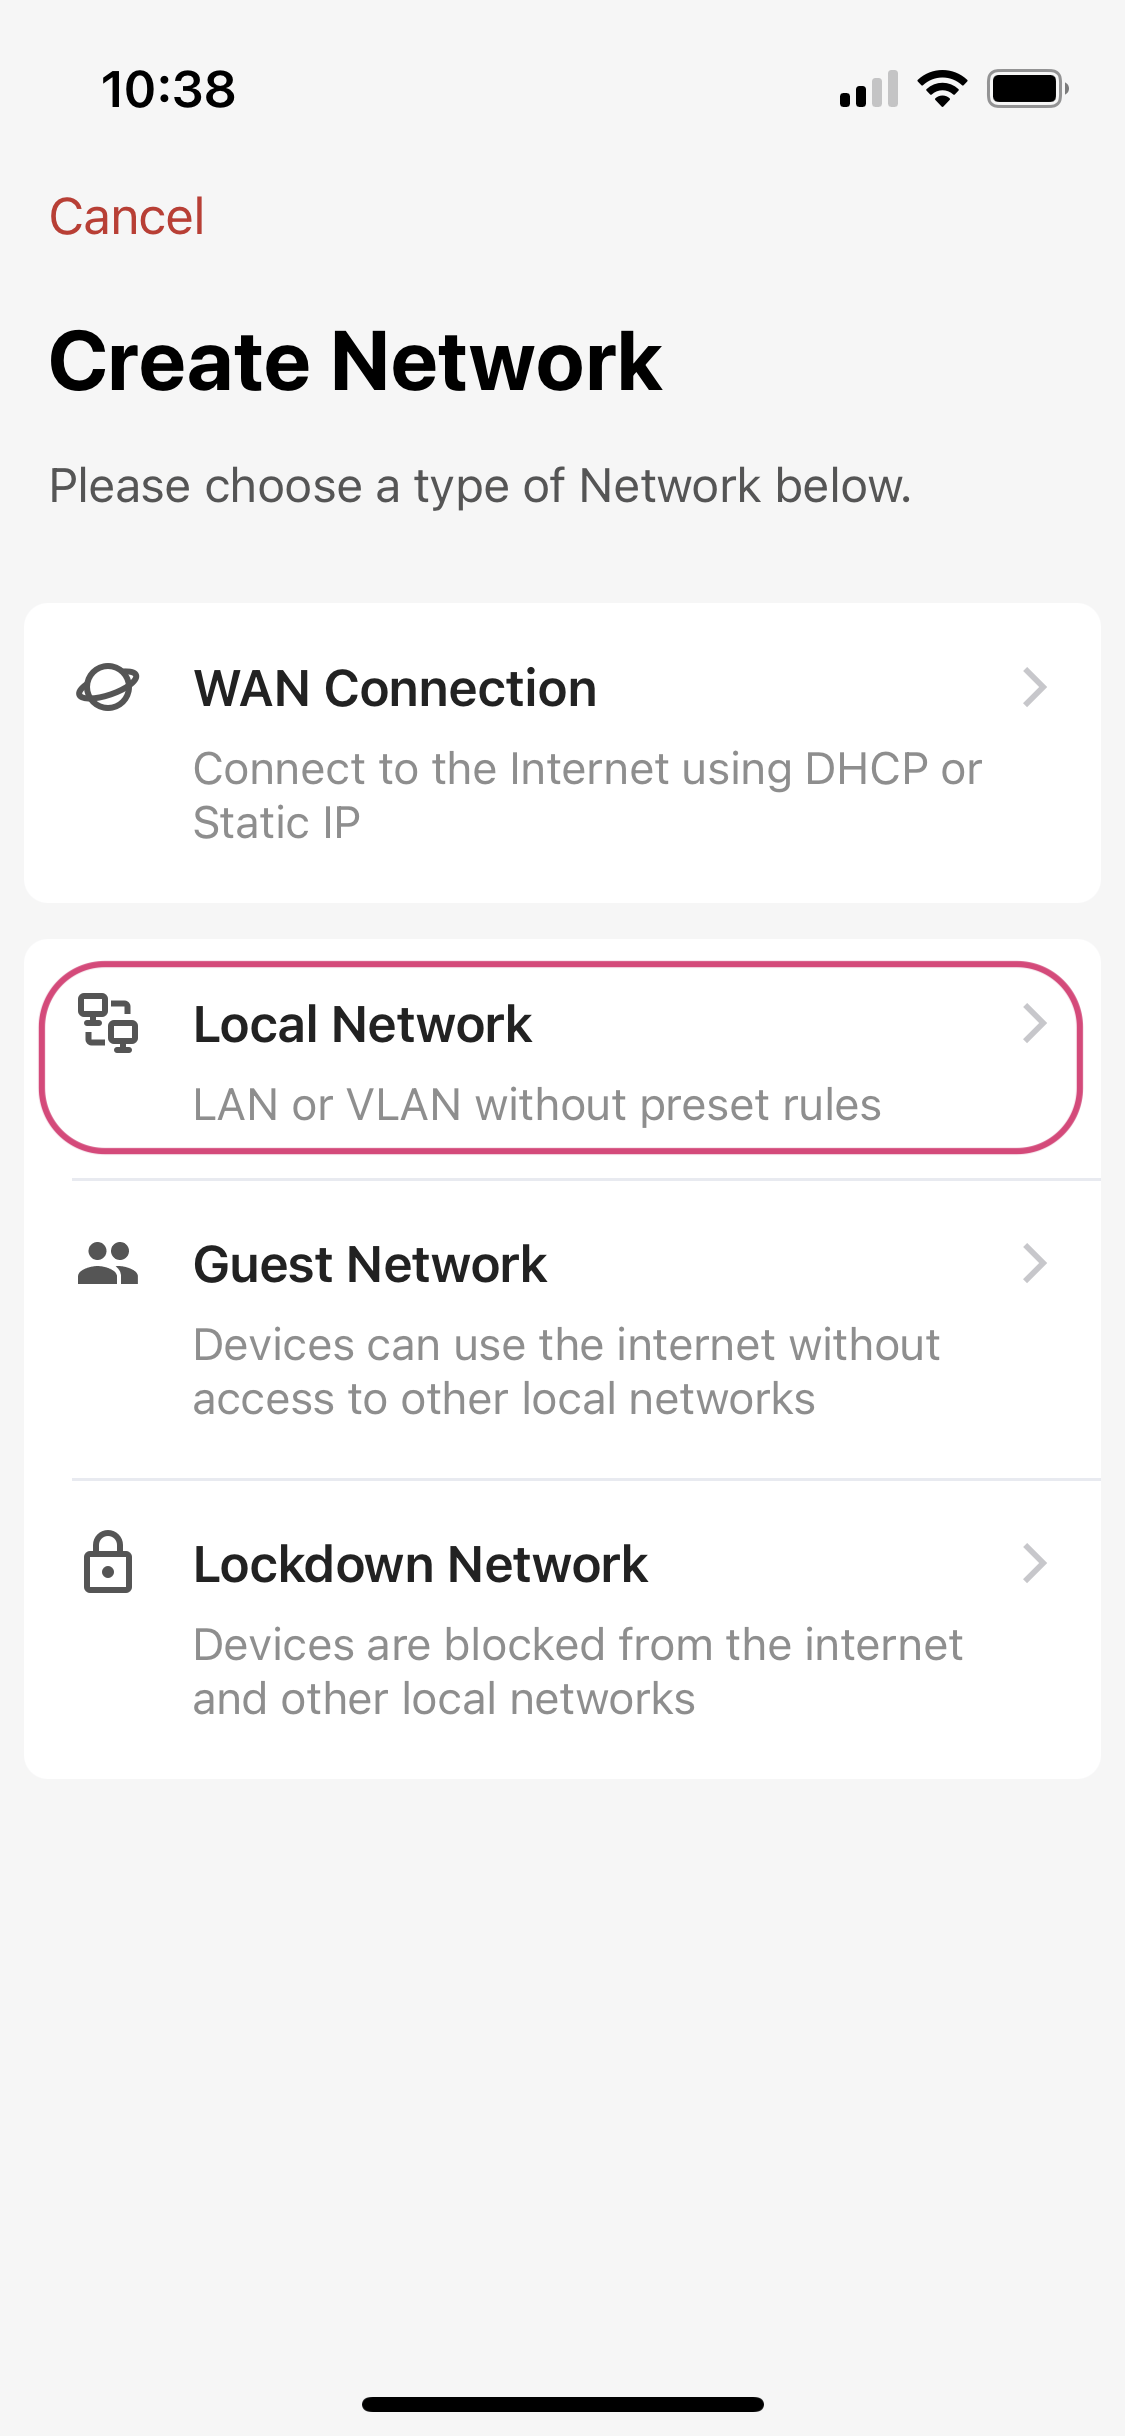 Choose the Local Network option for your IoT devices